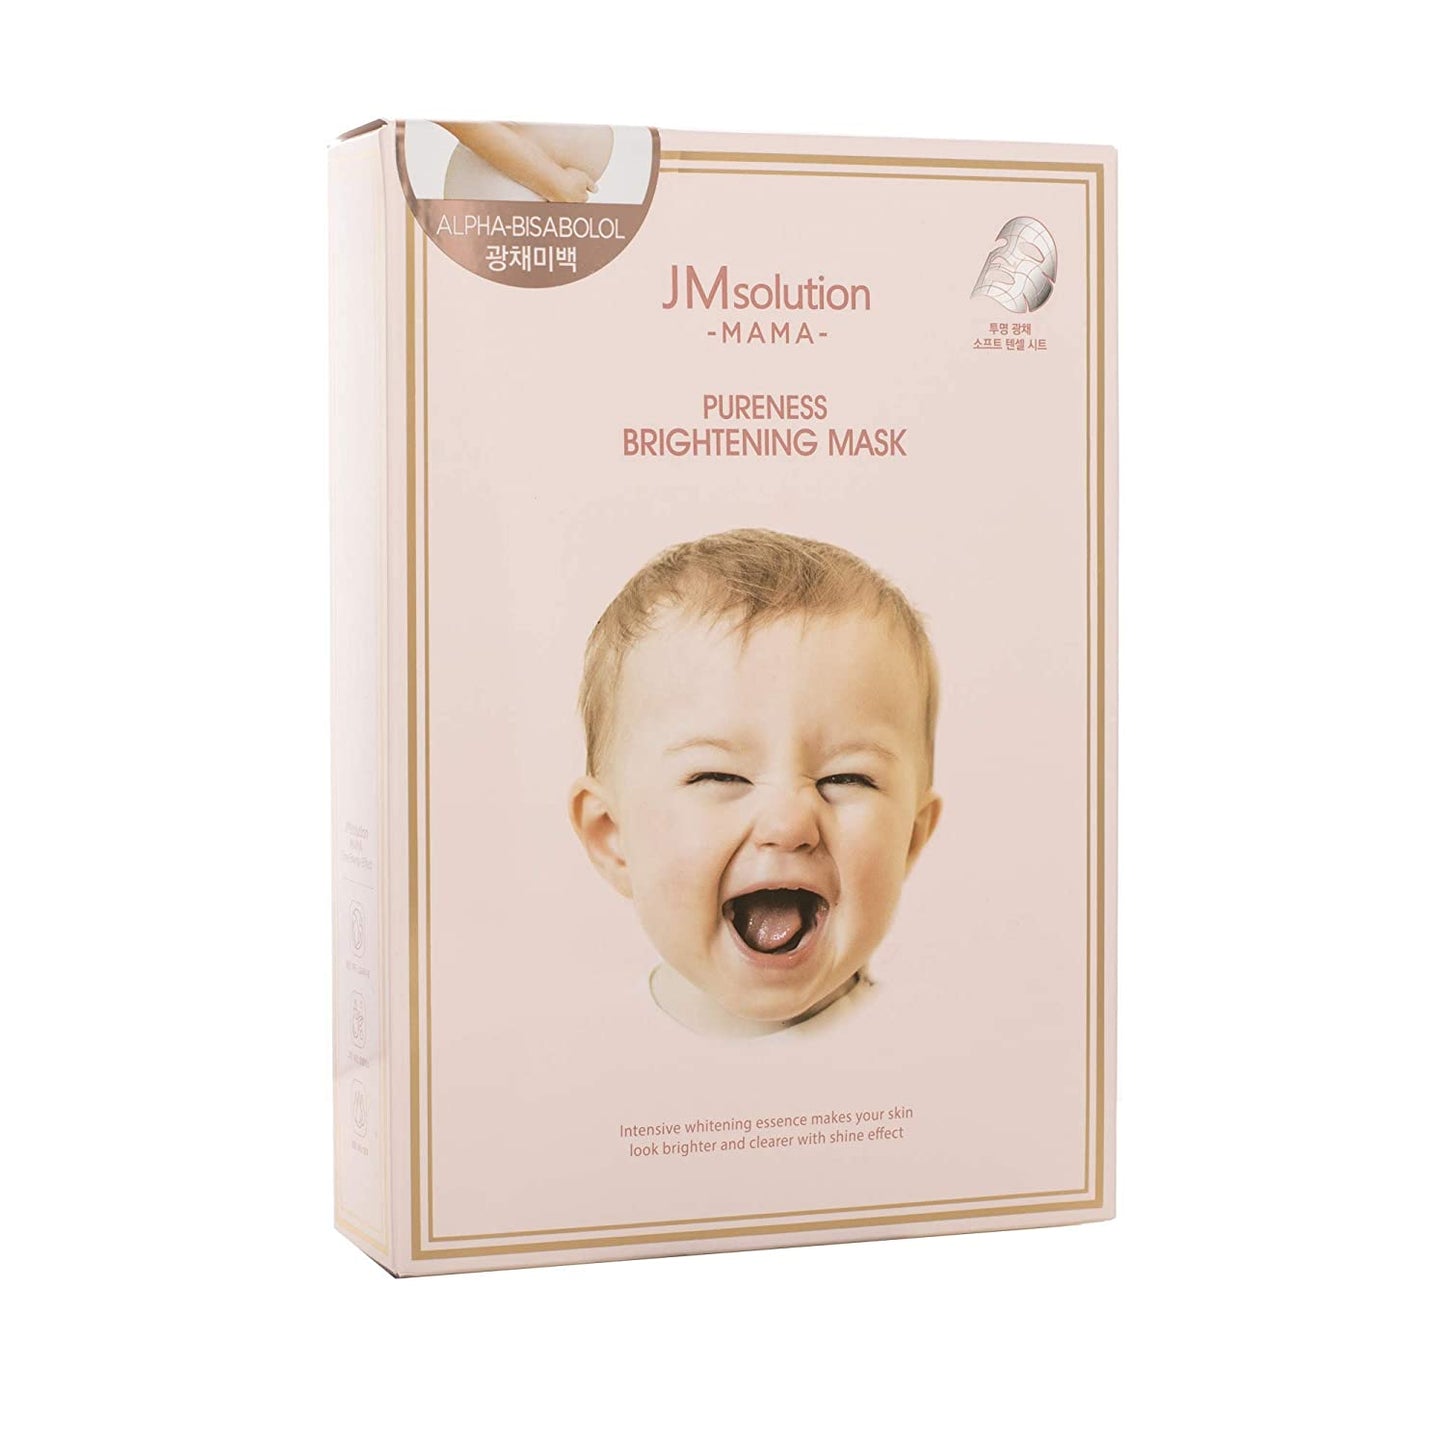 JM Solution Mama Pureness Brightening Mask 10 Sheets/1 pack